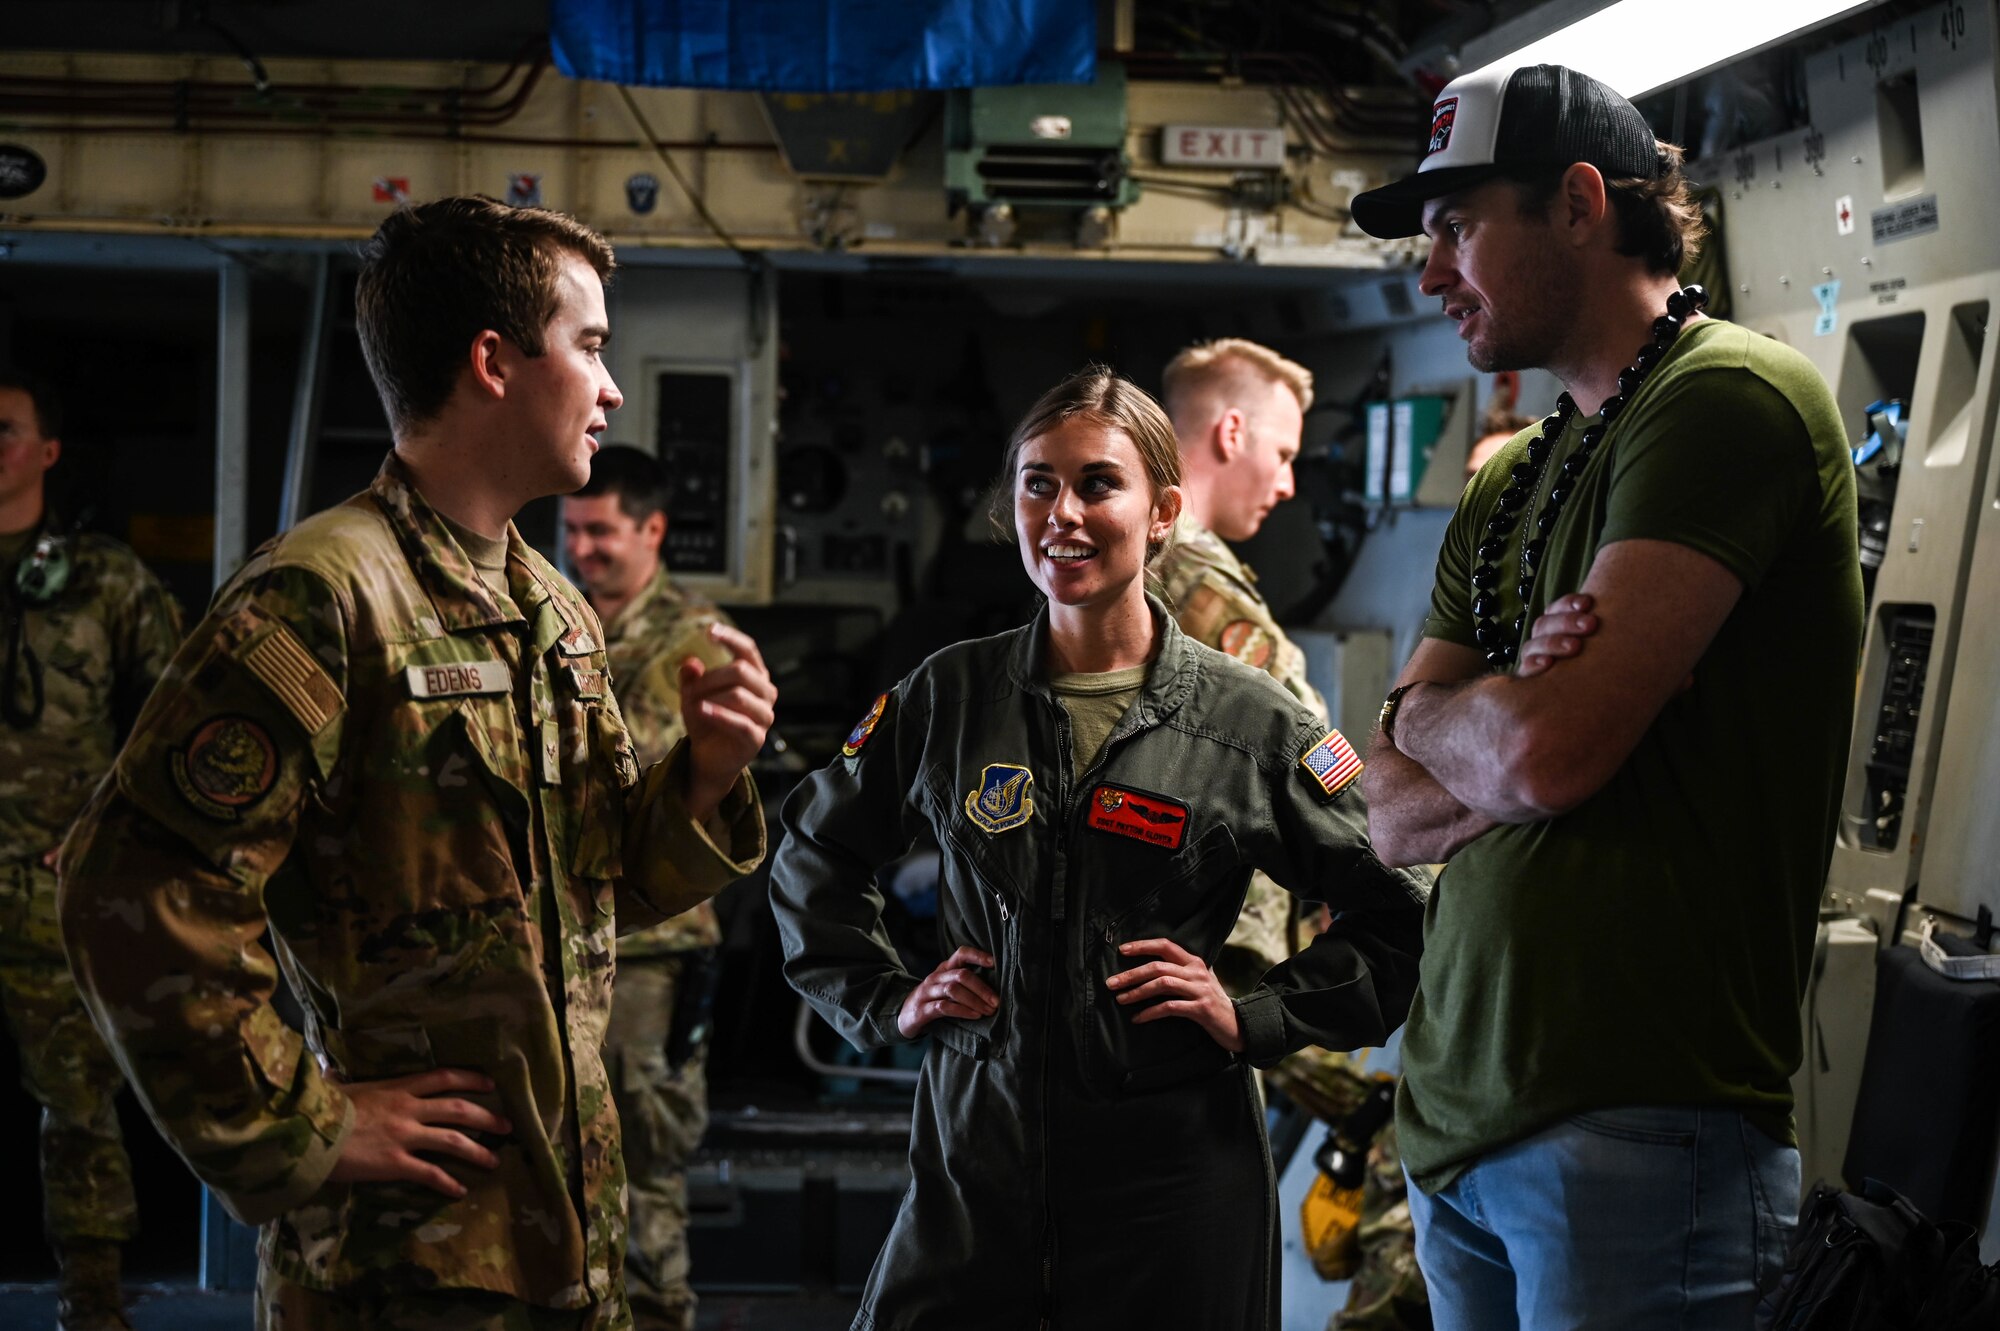 Matt Stell, country music artist, speaks with Airman 1st Class Coleton Edens and Staff Sgt. Payton Glover, 535th Airlift Squadron C-17 Globemaster III loadmasters, after filming for CMT’s Hot 20 Annual Holiday Salute to the Troops at Joint Base Pearl Harbor-Hickam, Hawaii, Nov. 29, 2021. Stell joined Cody Alan, Country Music Television Radio host and executive producer, during a tour highlighting JBPHH Airmen. (U.S. Air Force photo by Staff Sgt. Alan Ricker)